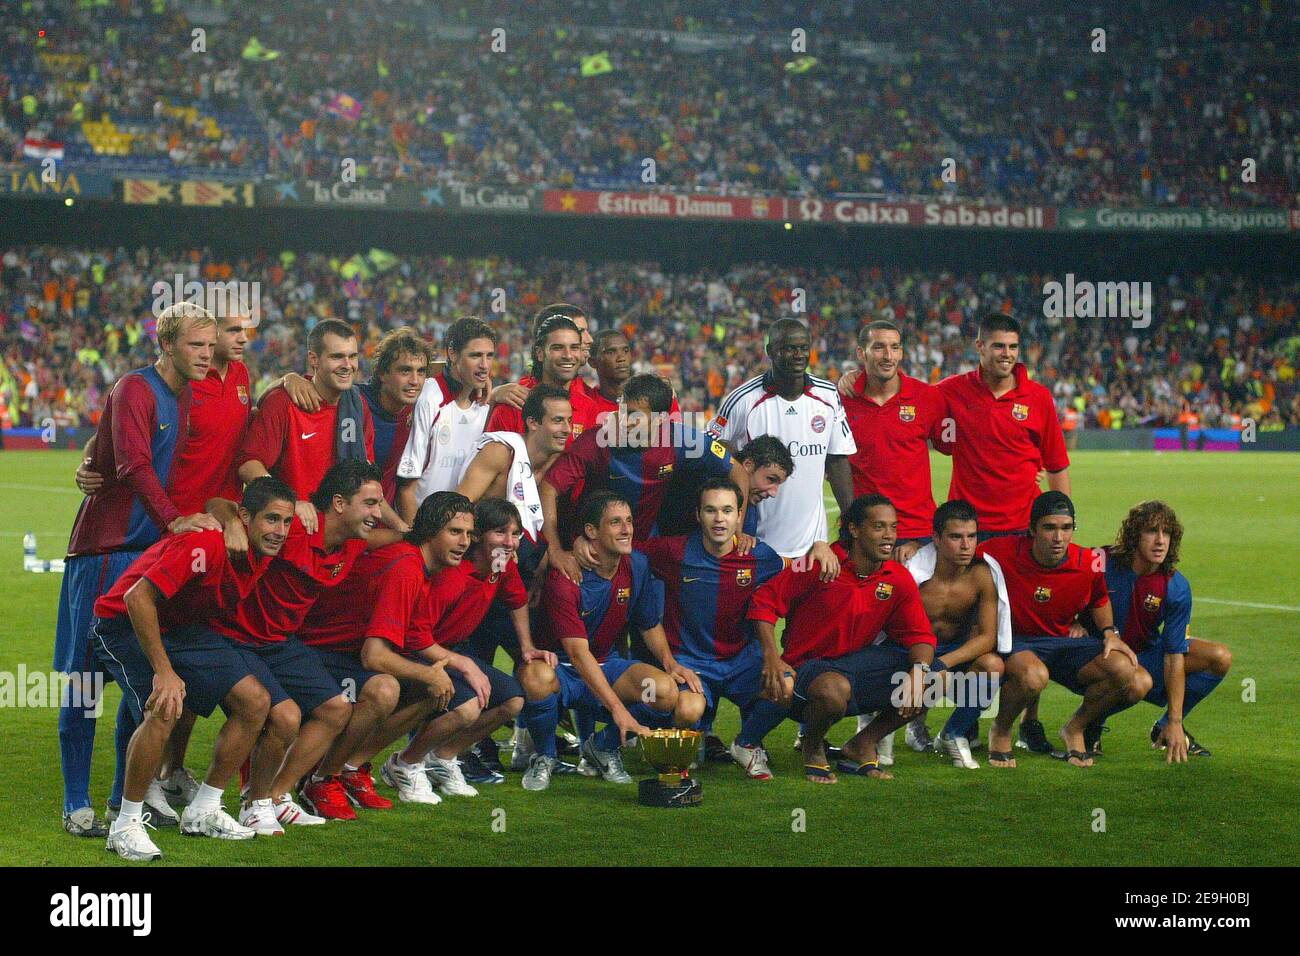 FC Barcelone team pose with the cup after winning the Gamper trophy, FC  Barcelona vs Bayern at Nou Camp, in Barcelona, Spain, on August 22, 2006.  Barcelona won 4-0. Photo by Manuel